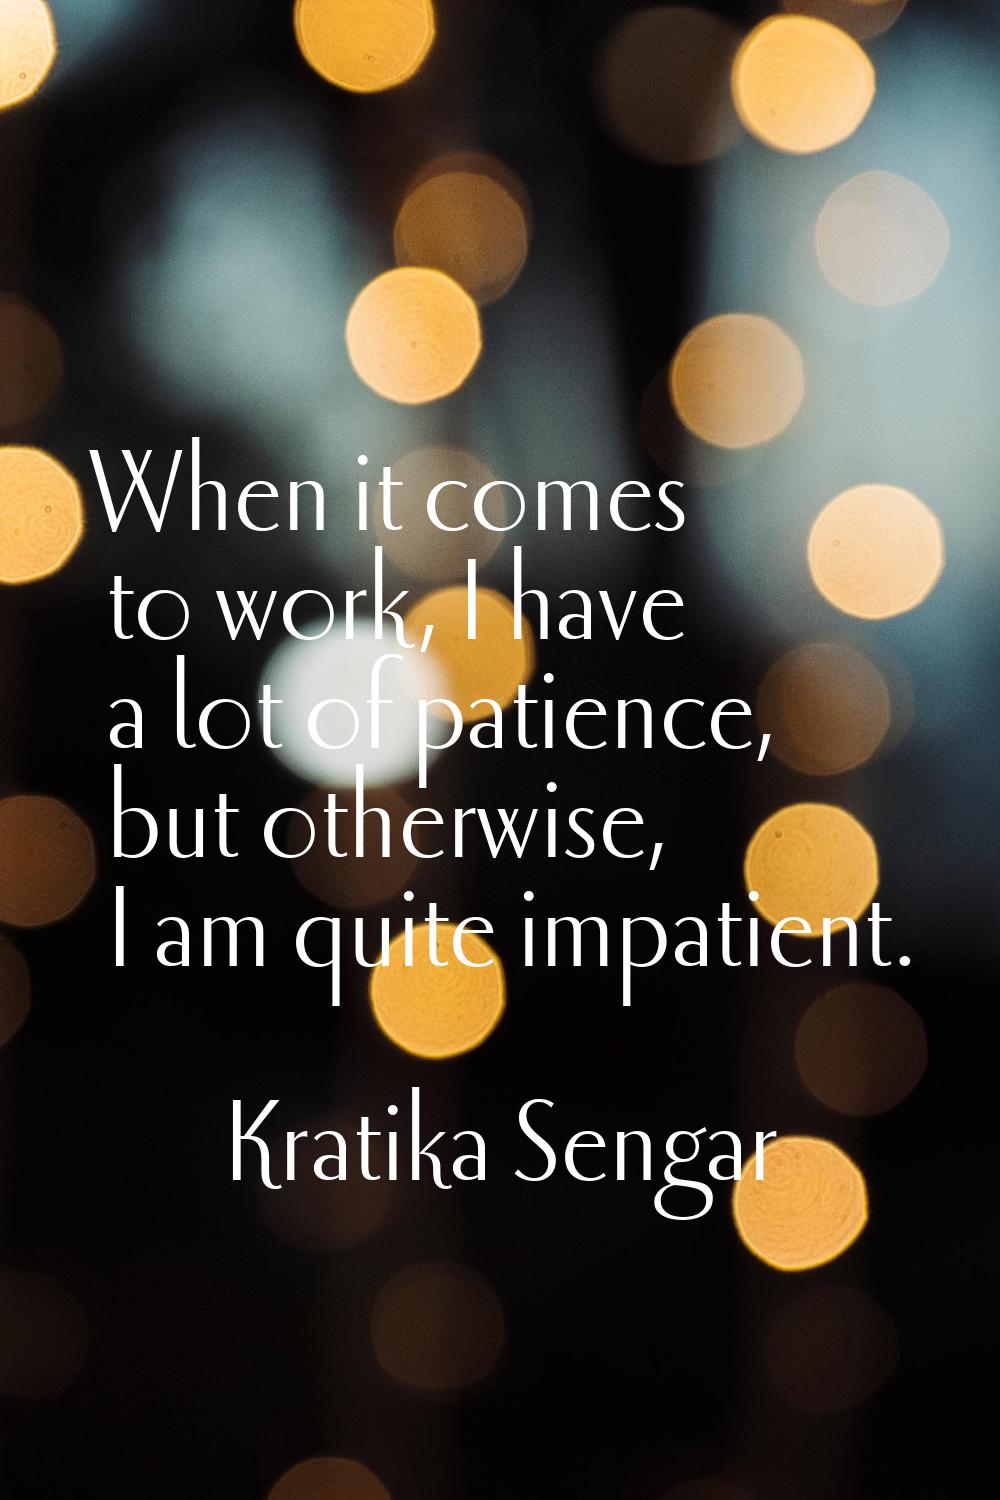 When it comes to work, I have a lot of patience, but otherwise, I am quite impatient.